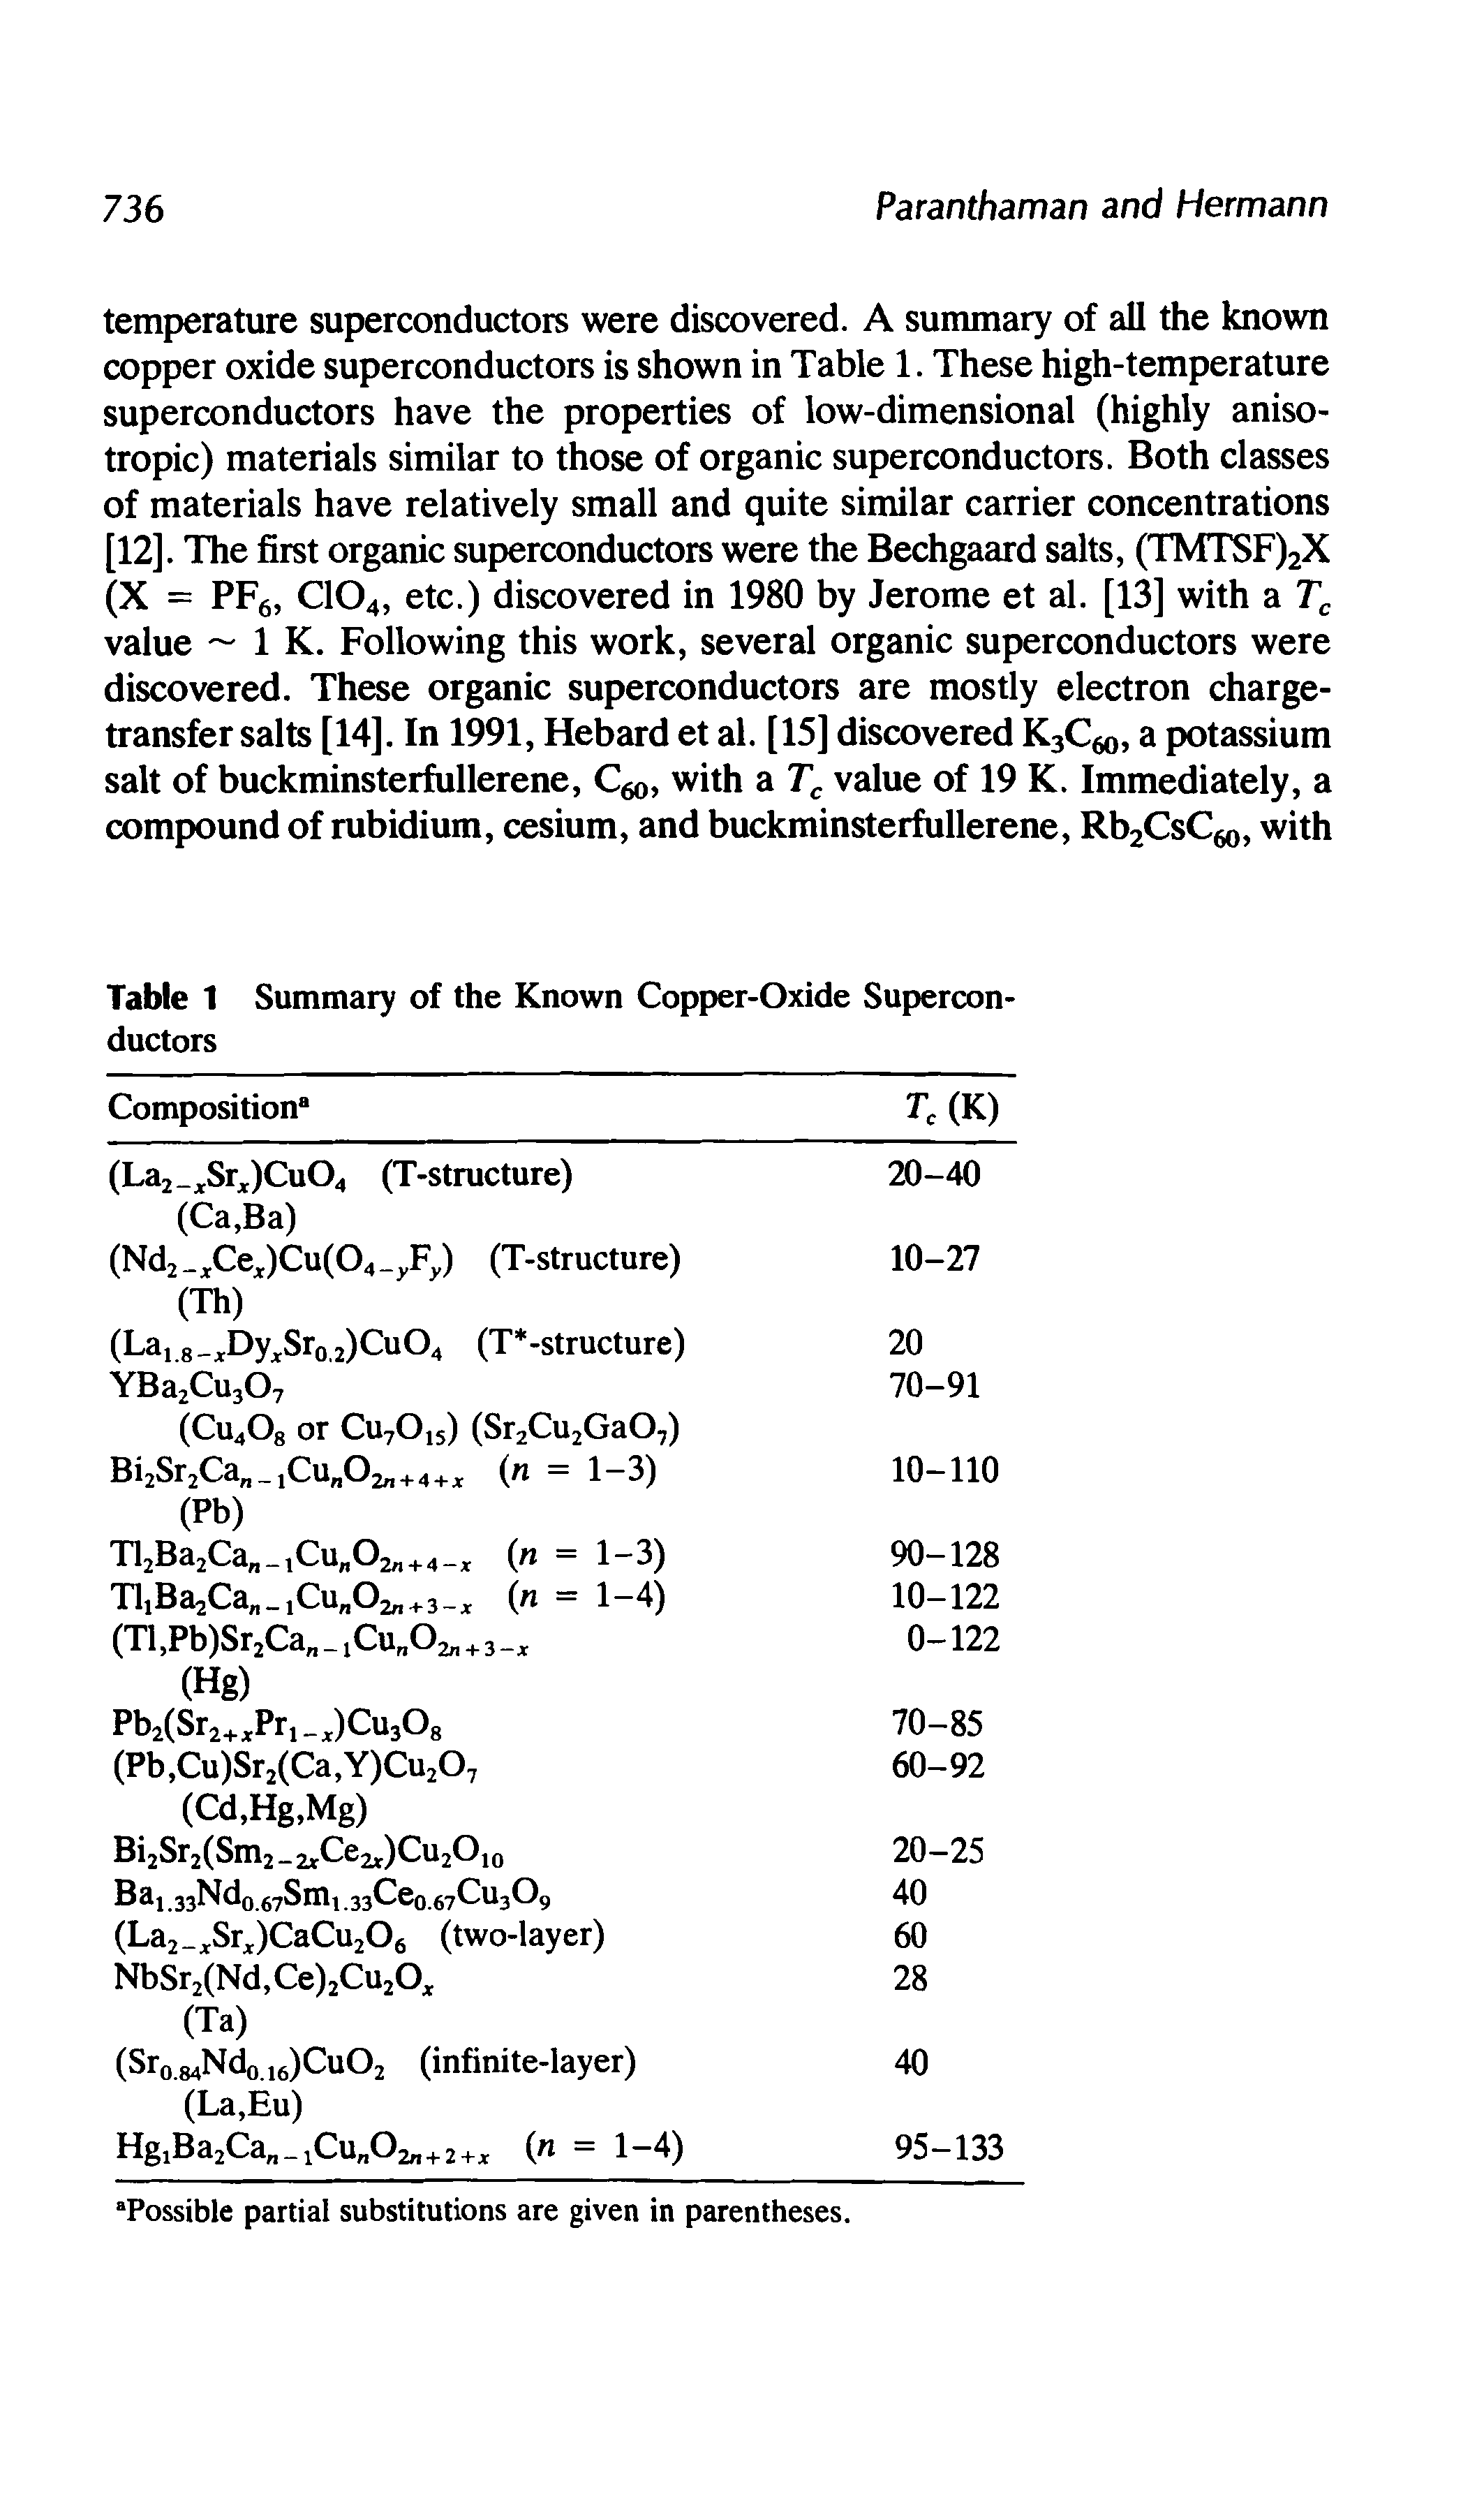 Table 1 Summary of the Known Copper-Oxide Superconductors...